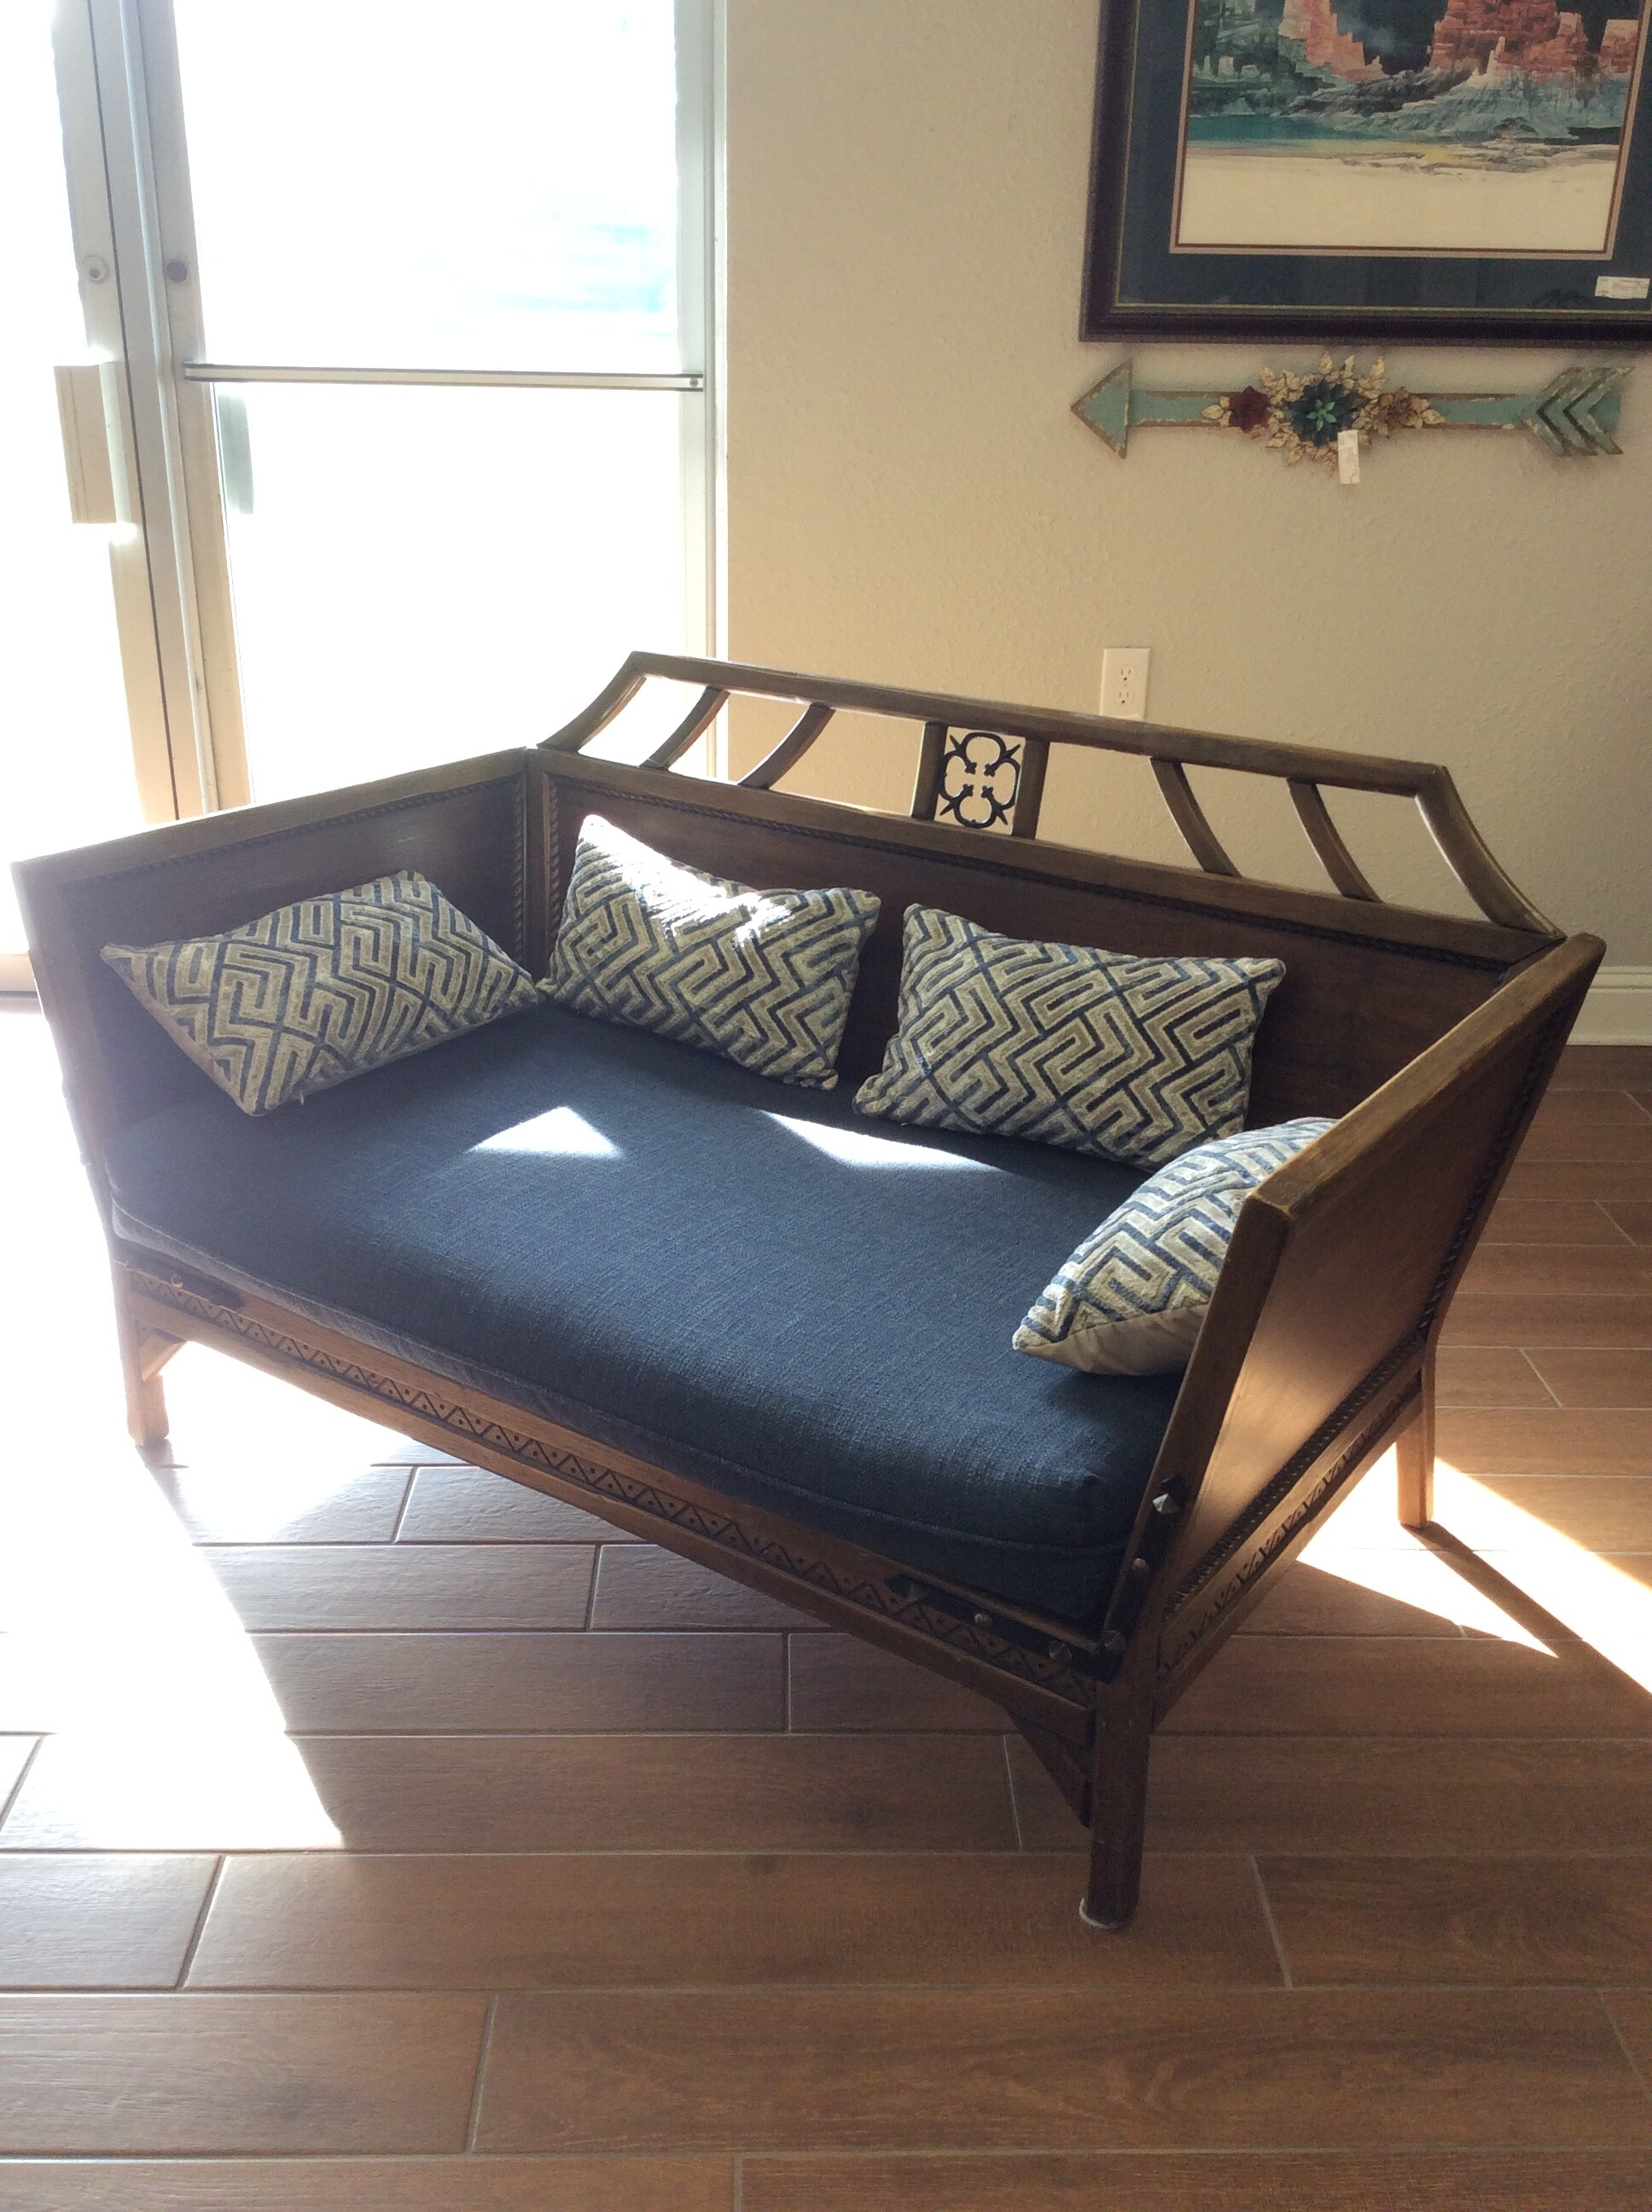 This beautiful vintage settee features a dark wood finish,  lovely carved details and is upholstered in navy blue. 4 accessory pillows included.